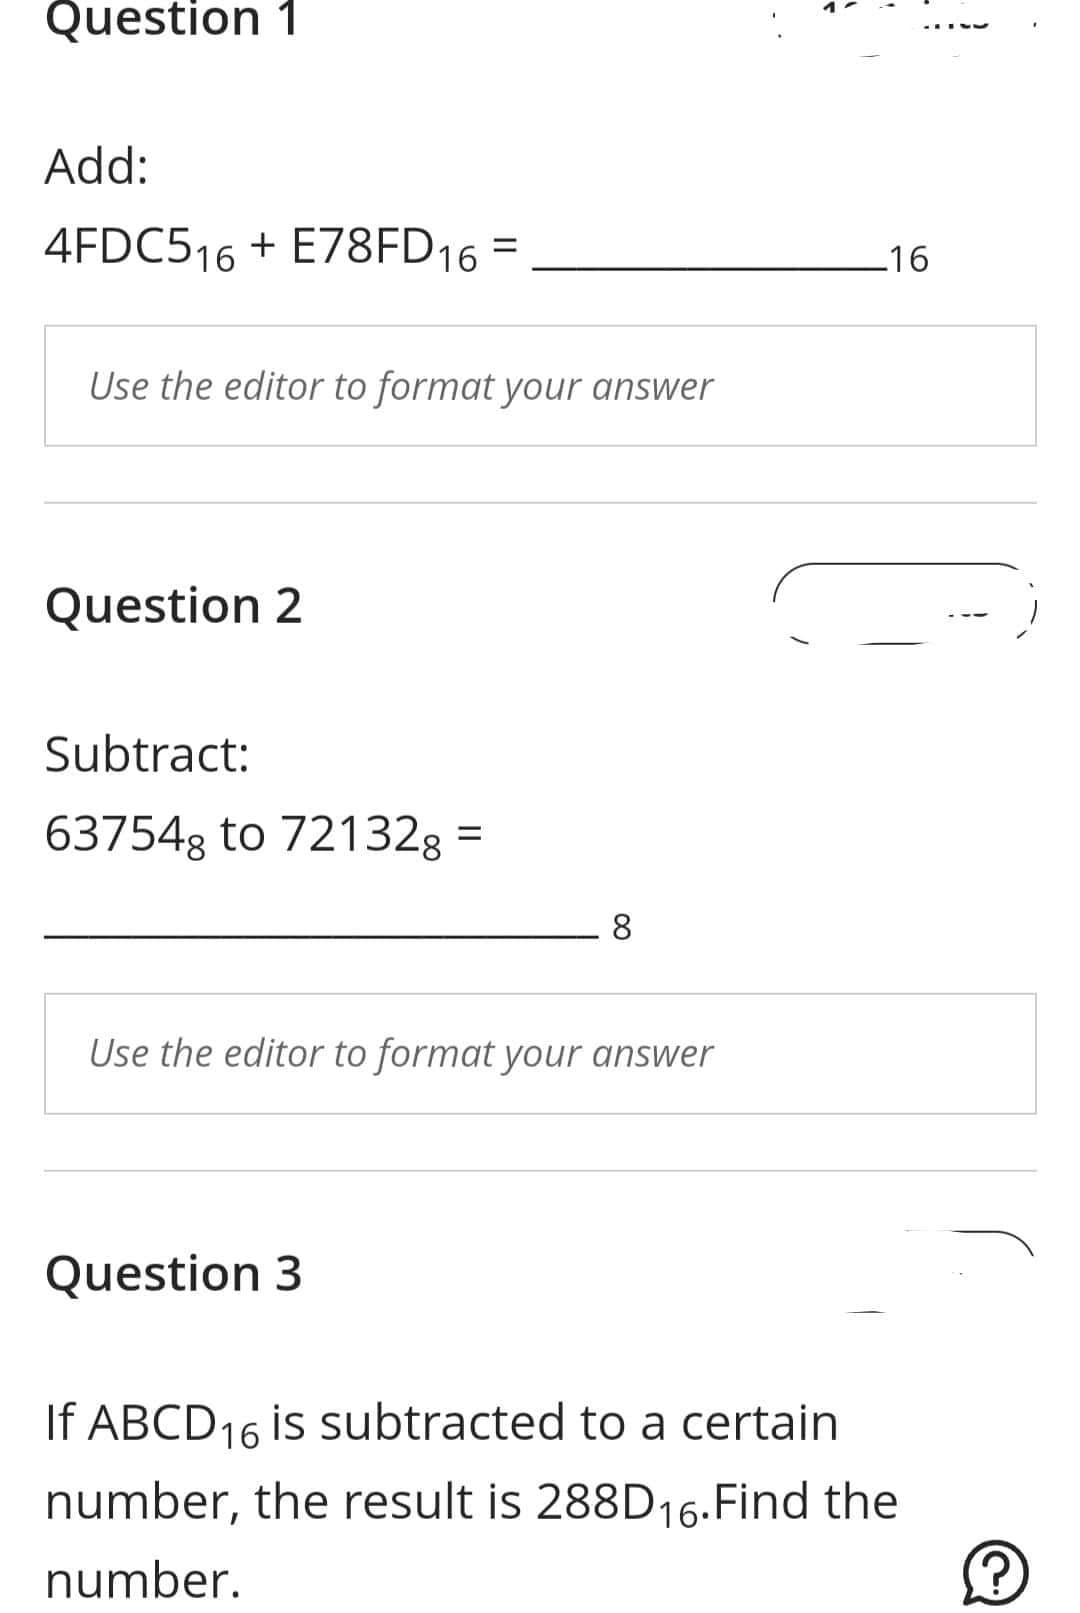 Question 1
Add:
4FDC516+E78FD16 =
Use the editor to format your answer
Question 2
Subtract:
637548 to 72132g =
8
Use the editor to format your answer
Question 3
_16
If ABCD16 is subtracted to a certain
number, the result is 288D16. Find the
number.